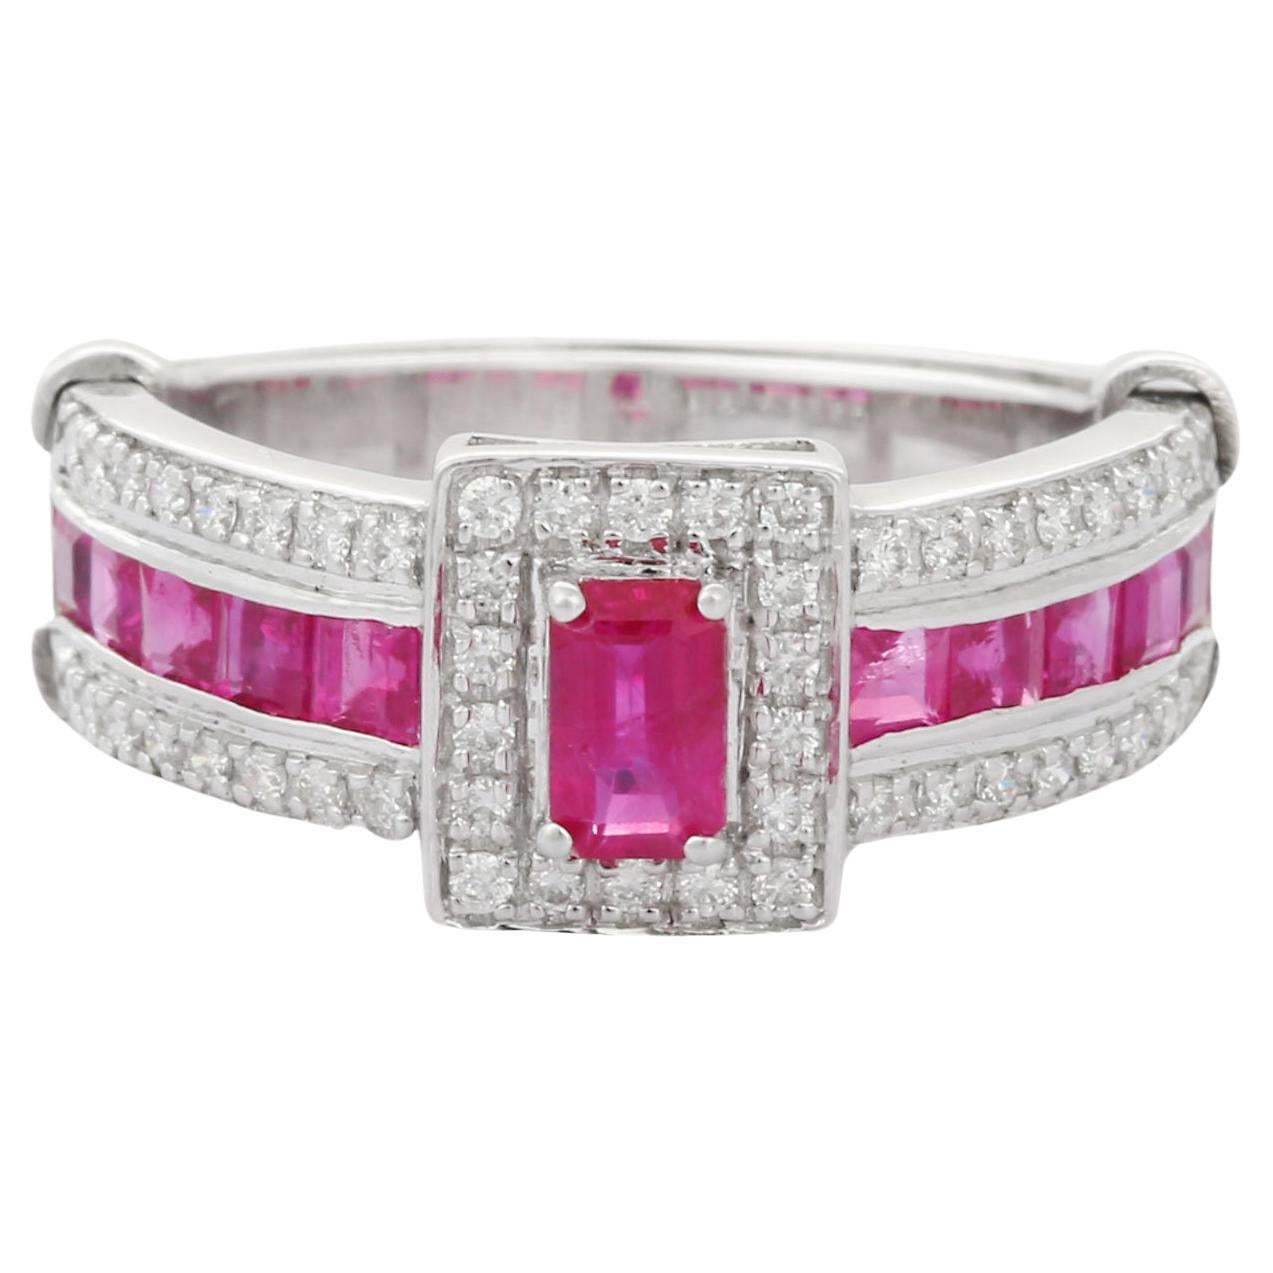 For Sale:  Prong Set Ruby Cluster Ring in 14K White Gold with Diamonds